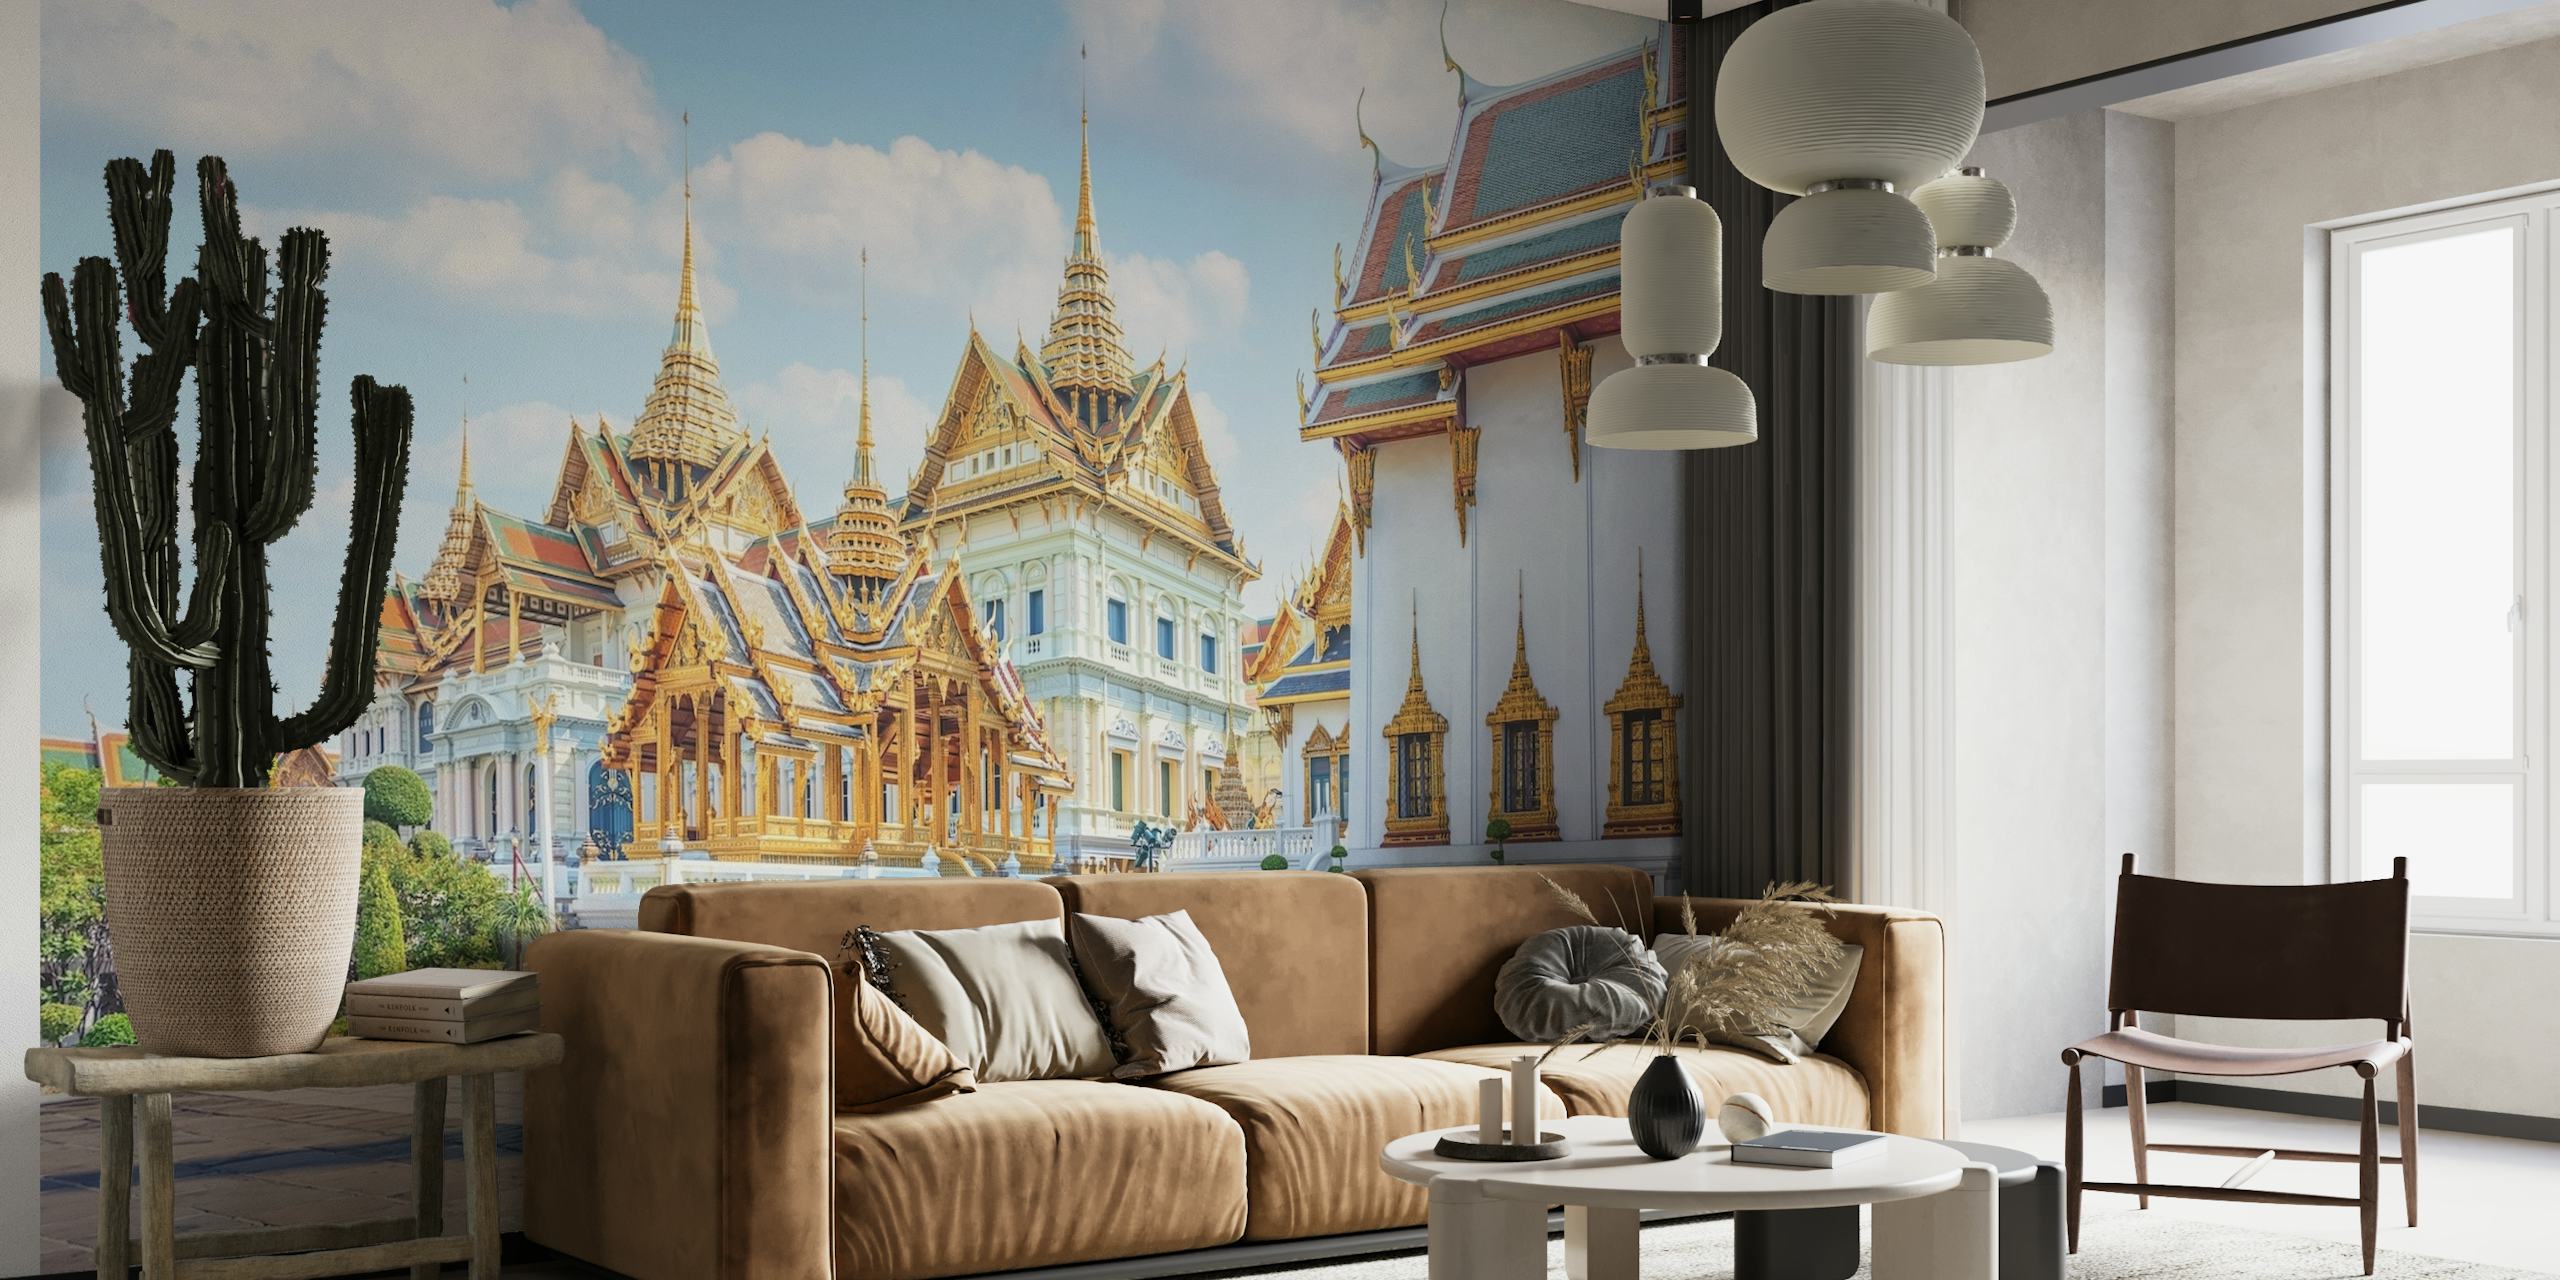 Wall mural of a grand palace with golden spires and ornate detailing under a clear blue sky.